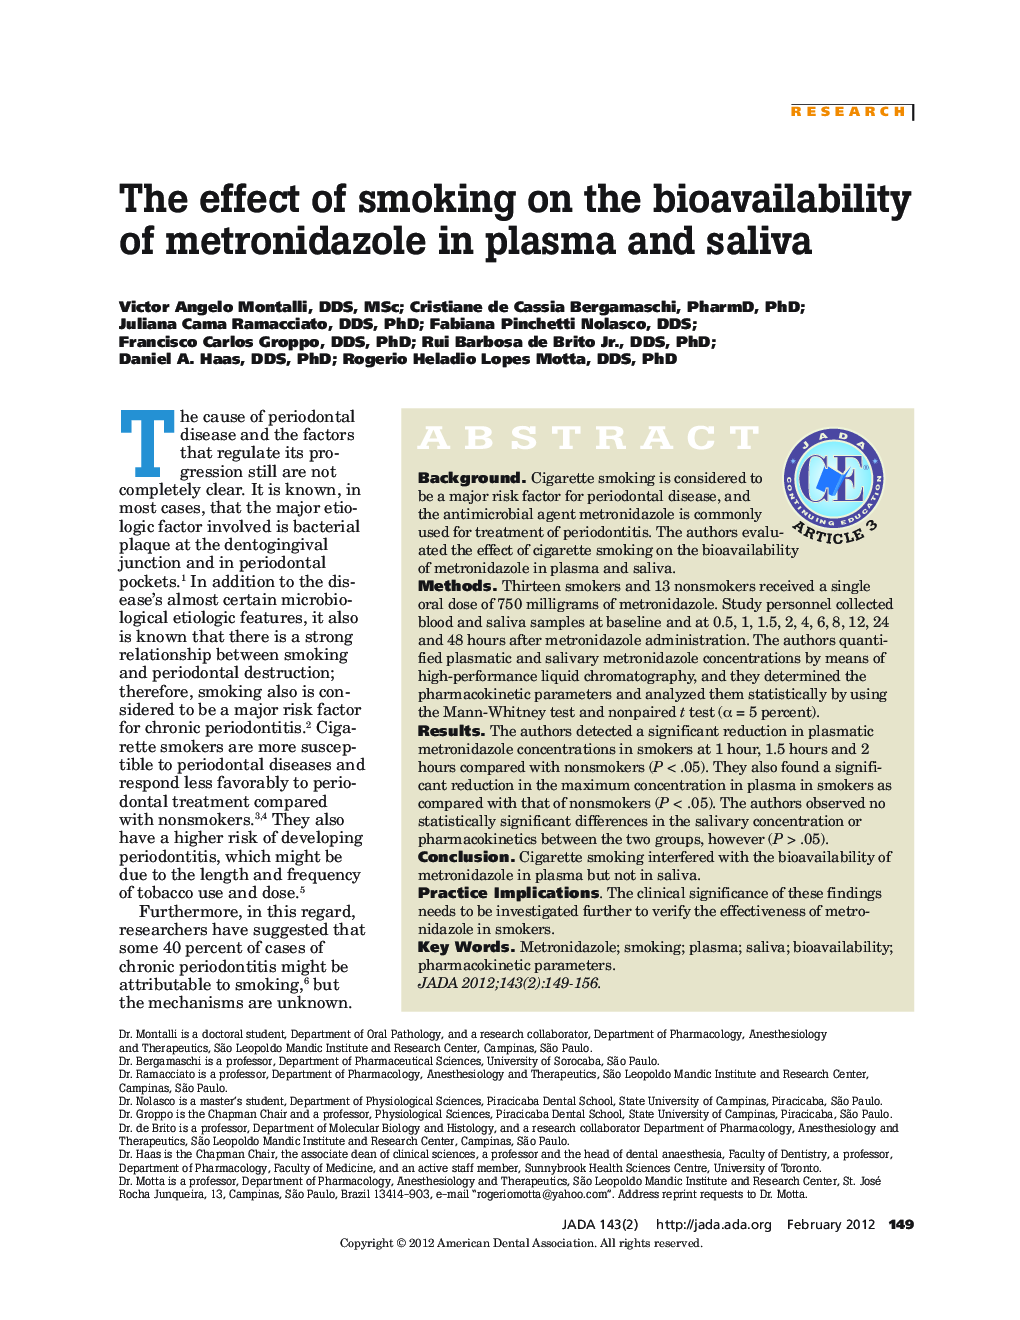 The effect of smoking on the bioavailability of metronidazole in plasma and saliva 